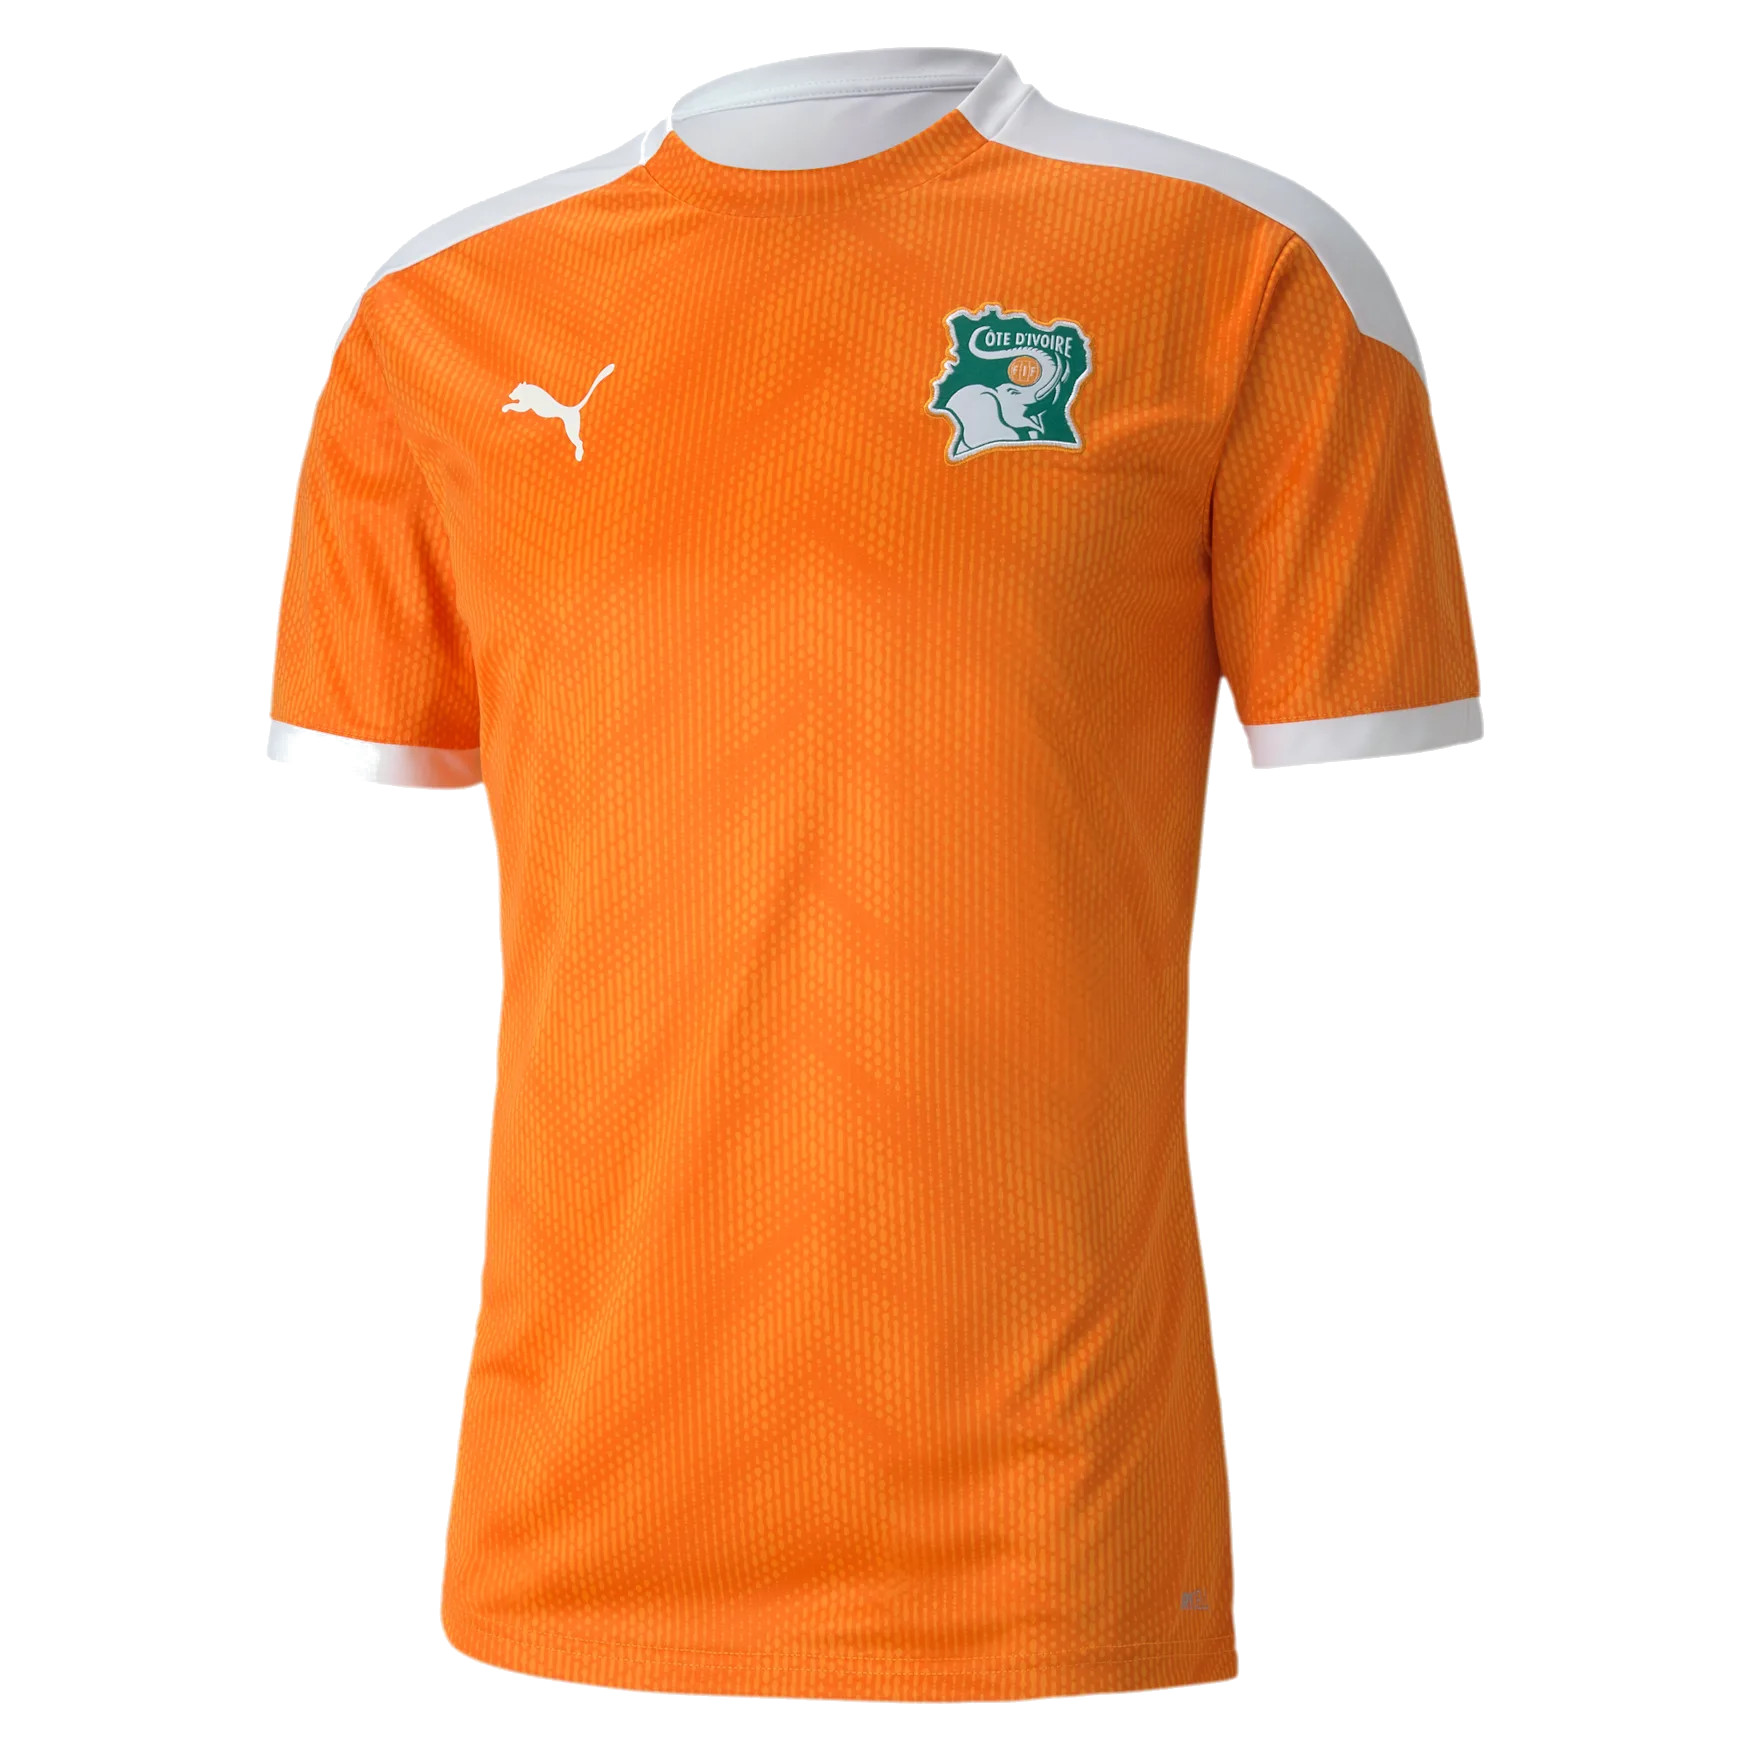 Cote-d Ivoire maillot pre match - Maillots-Football.com